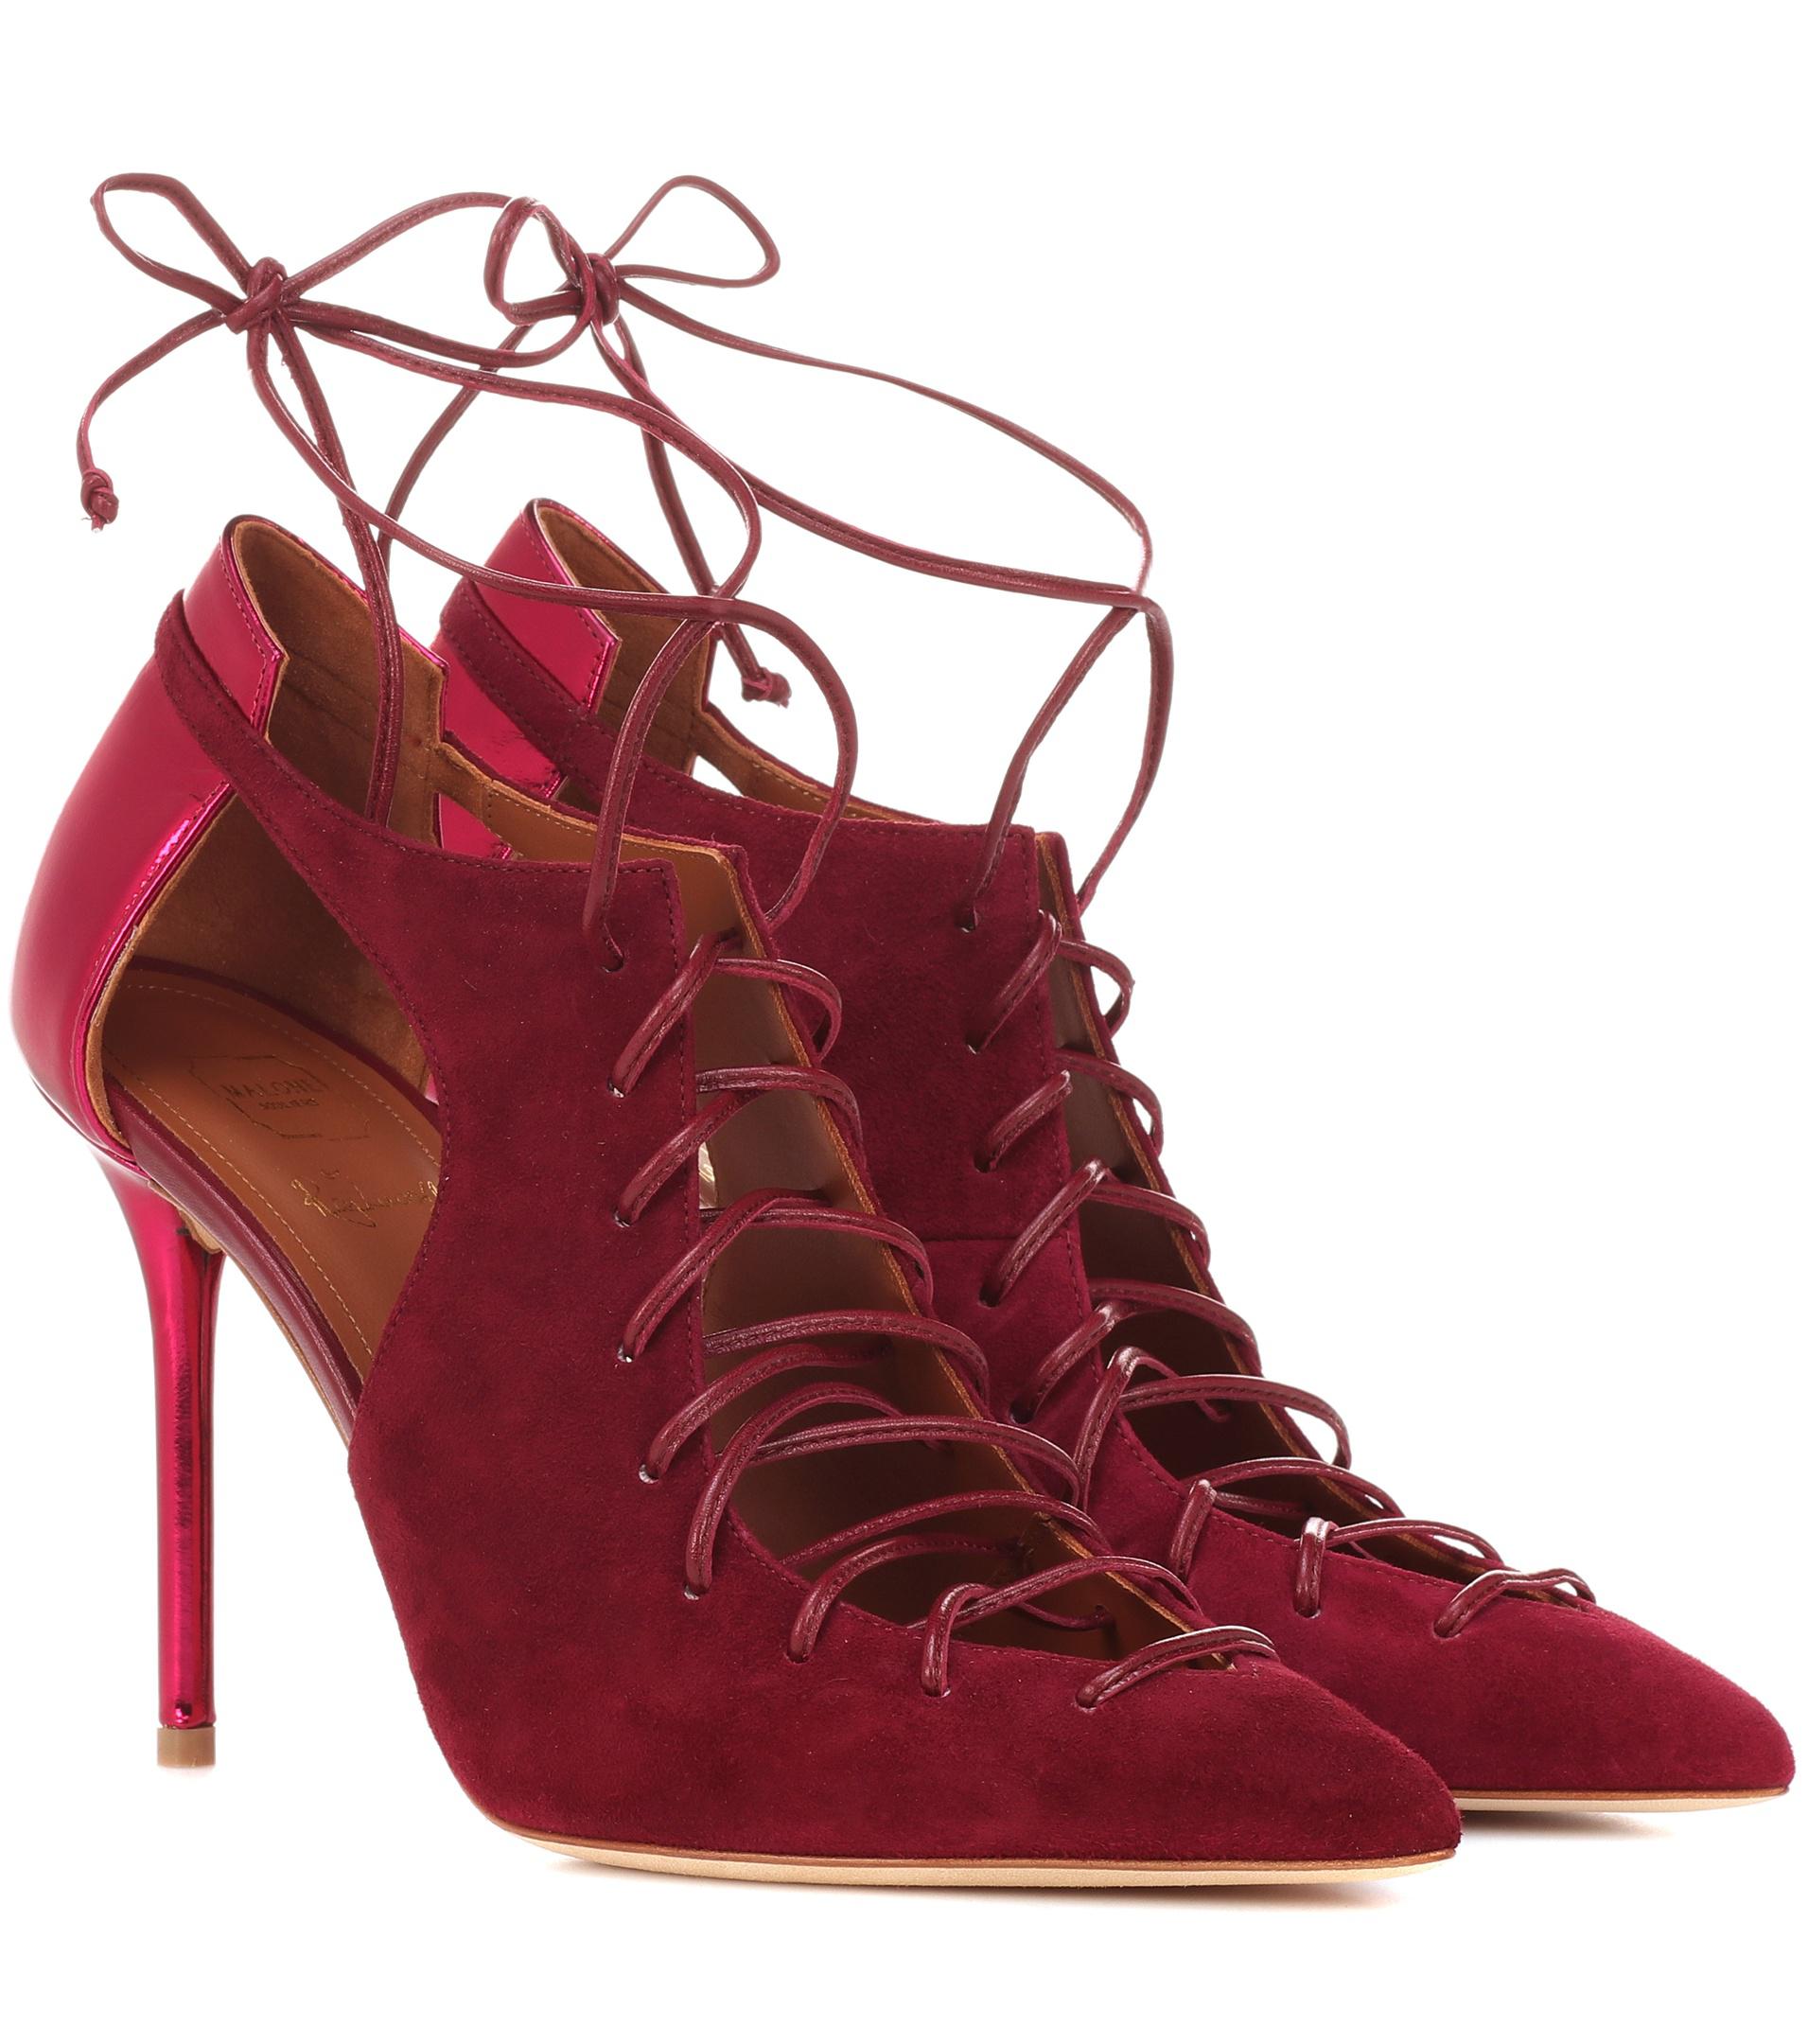 Malone Souliers Montana 100 Suede Ankle Boots in Red - Lyst